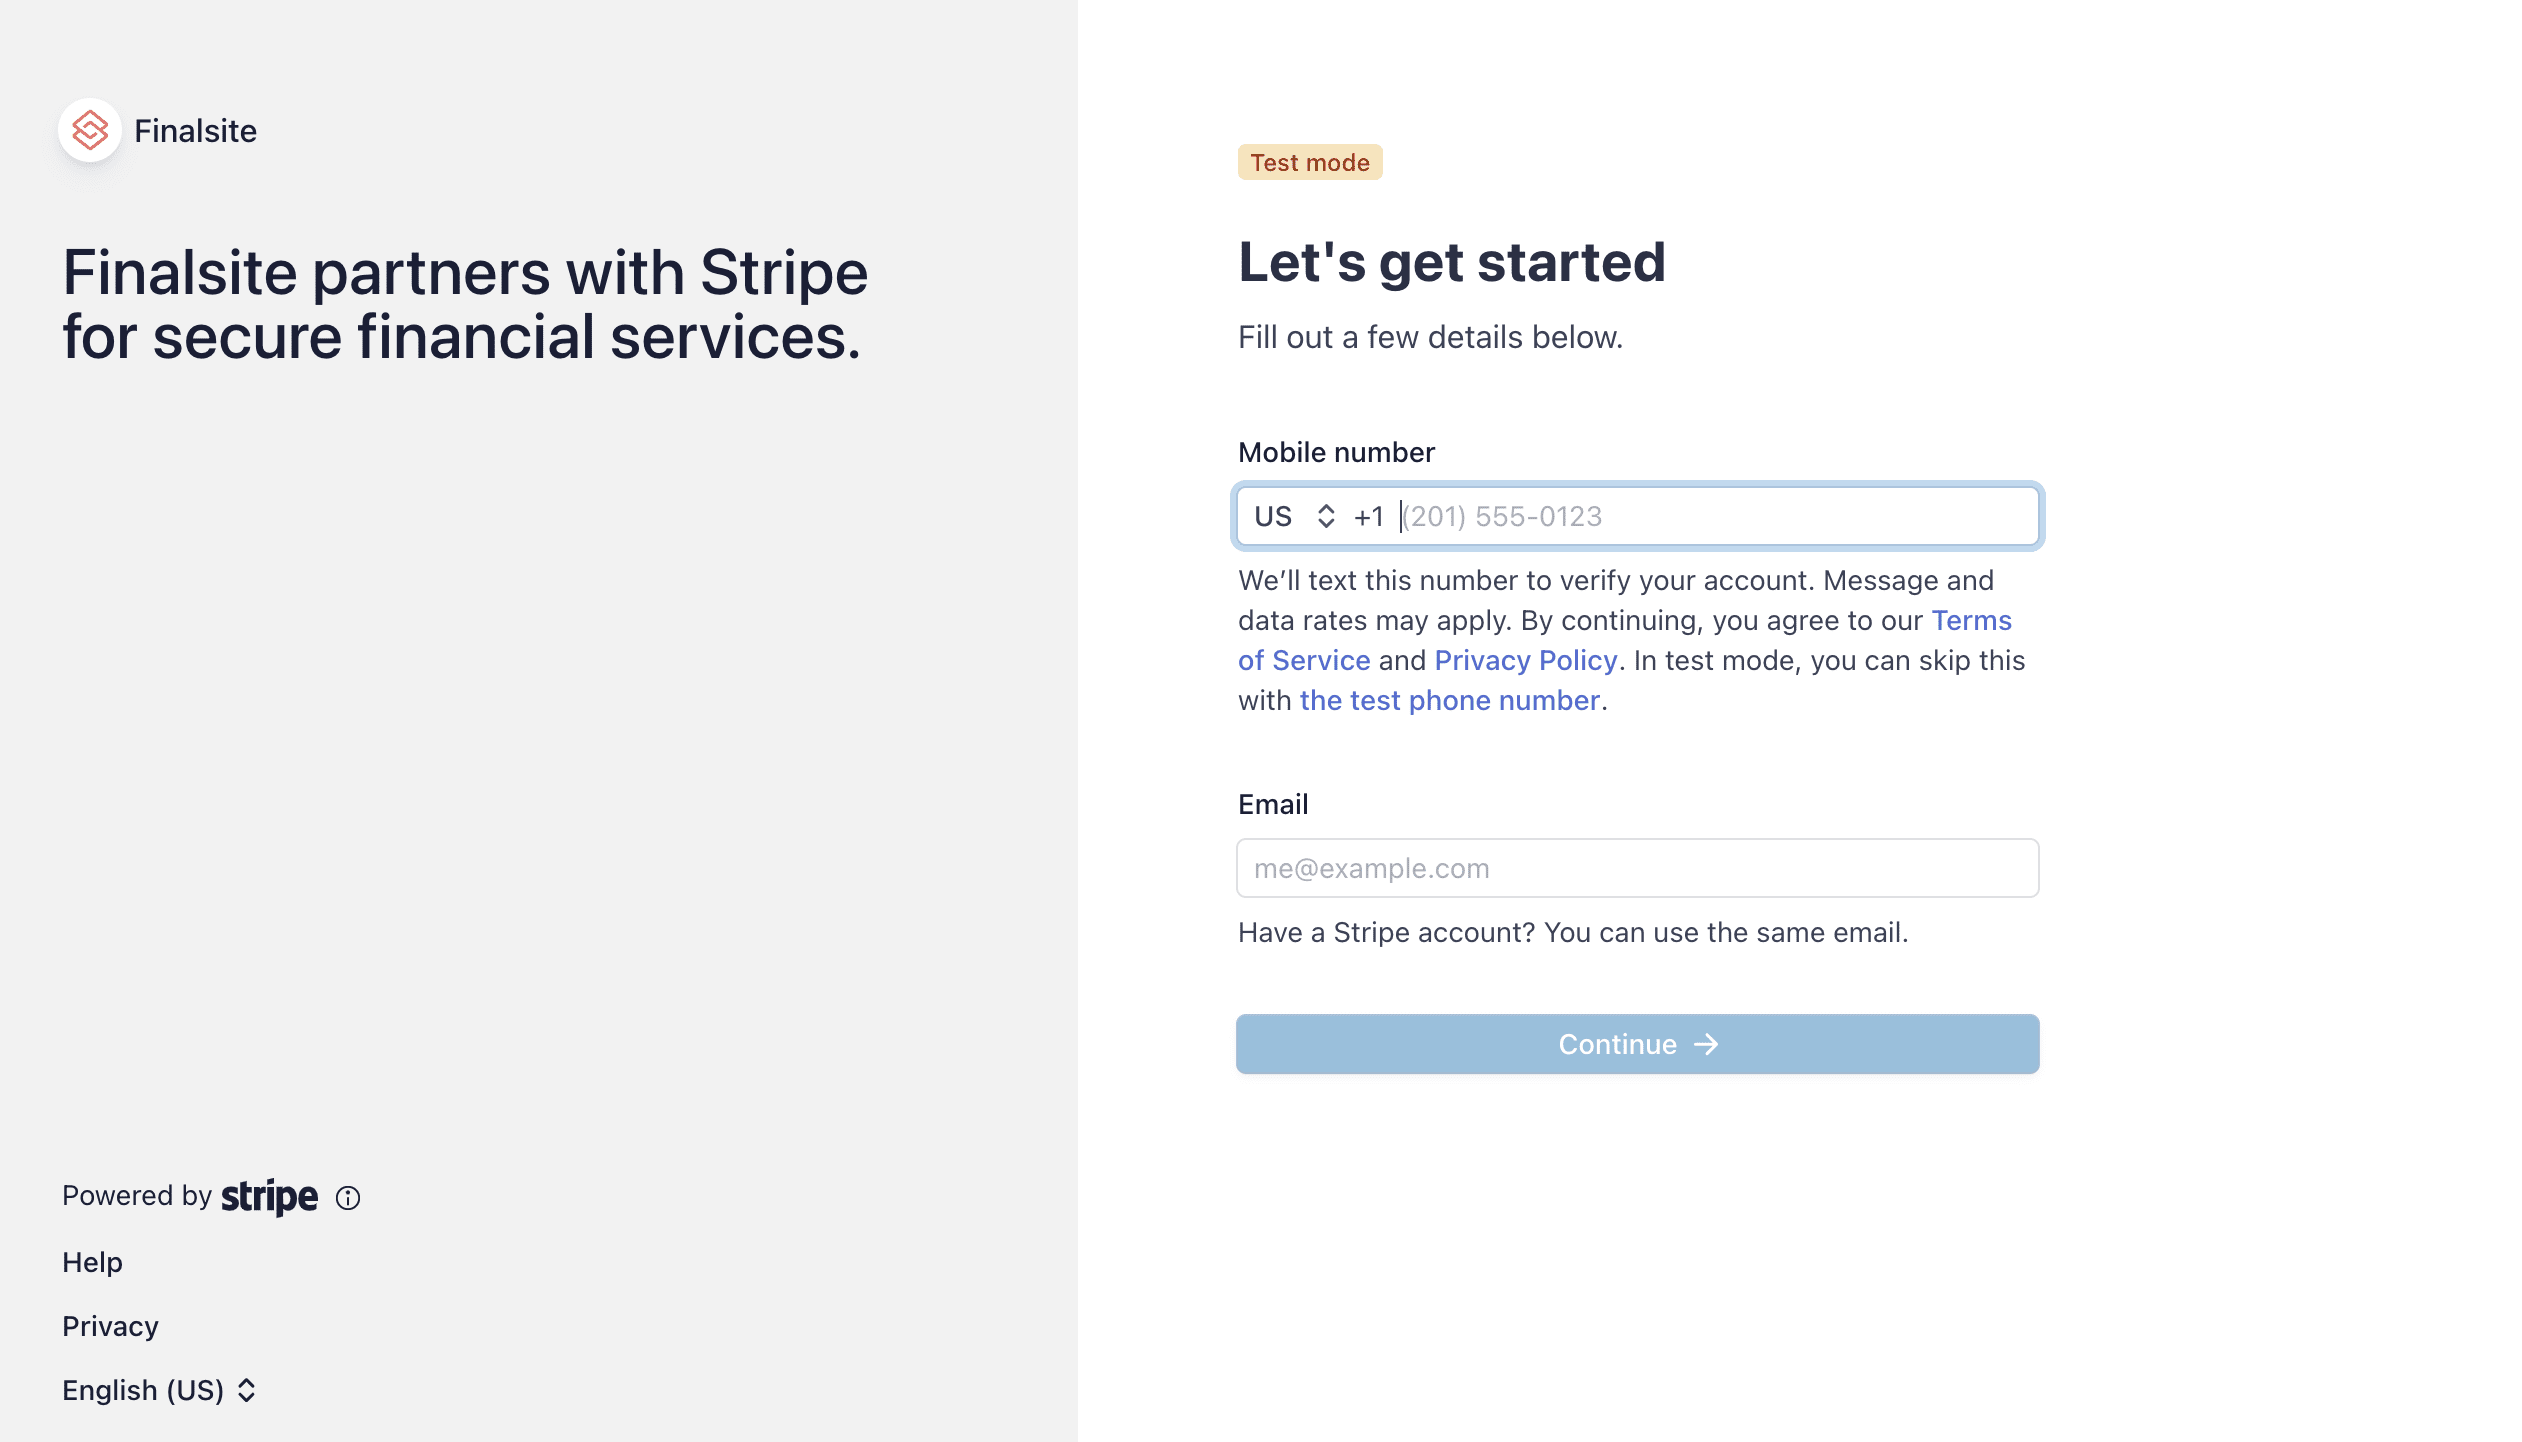 First page in Stripe, asking you to enter a phone number.